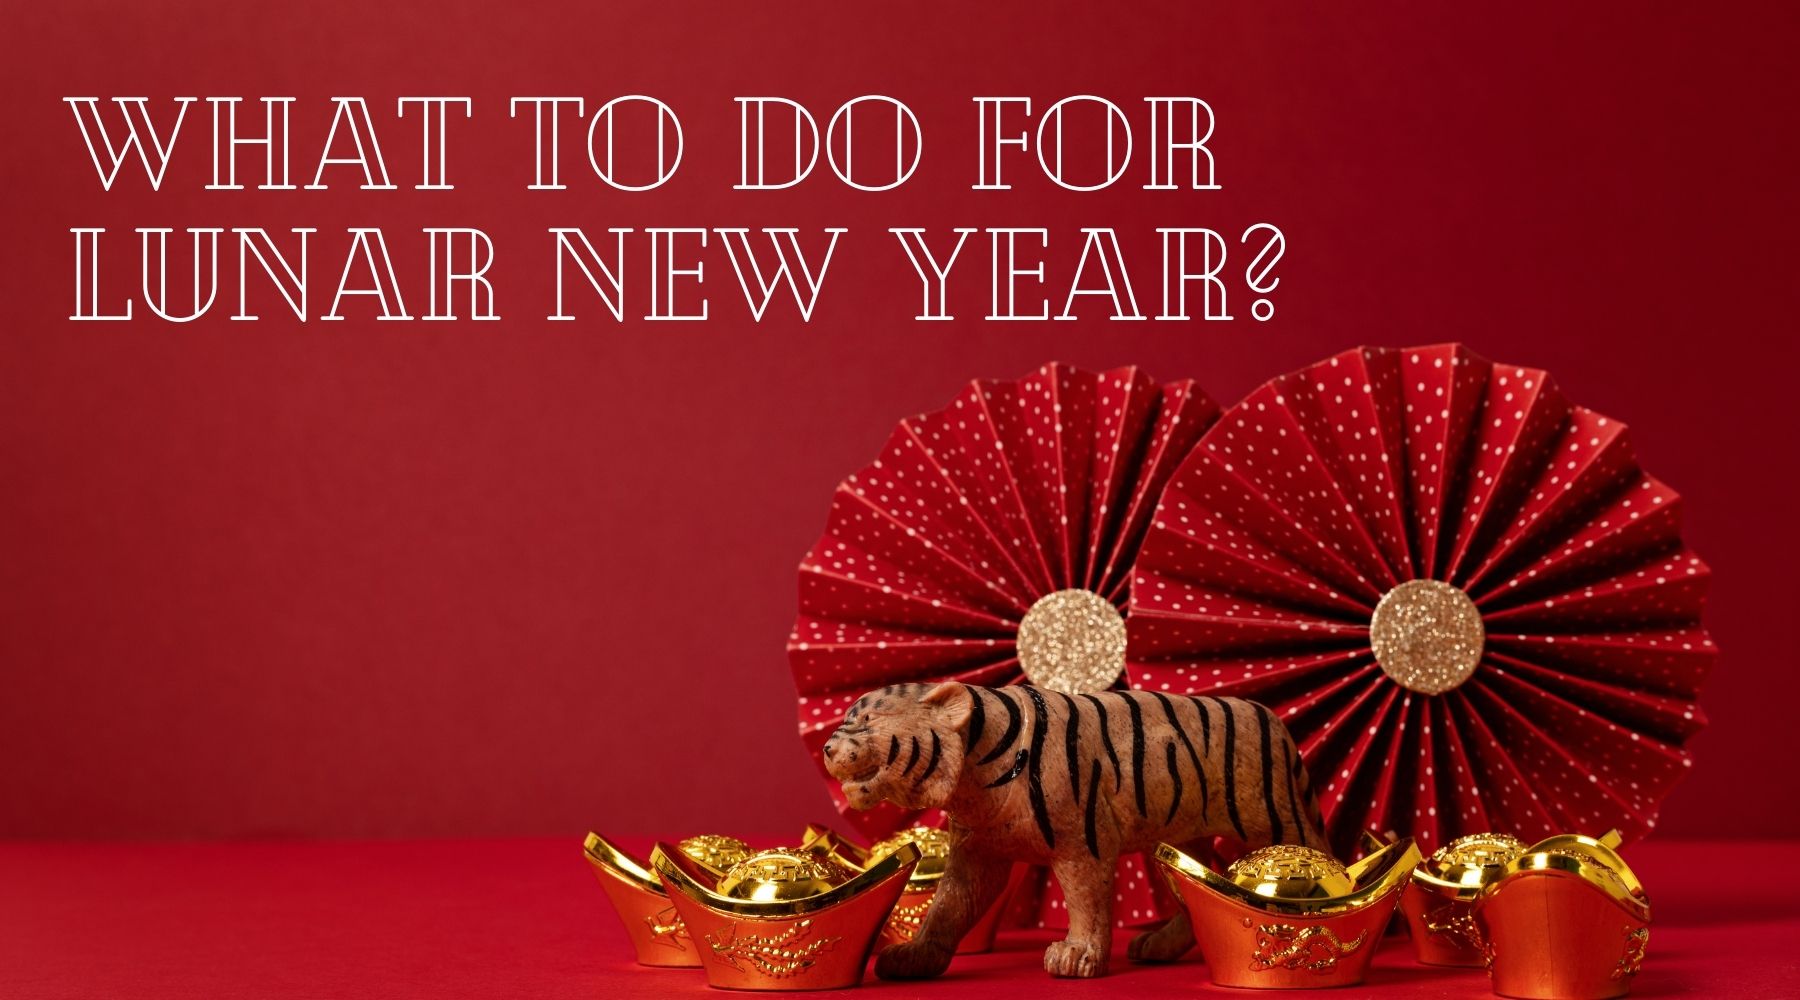 What to do for Lunar New Year? - Millon Wines